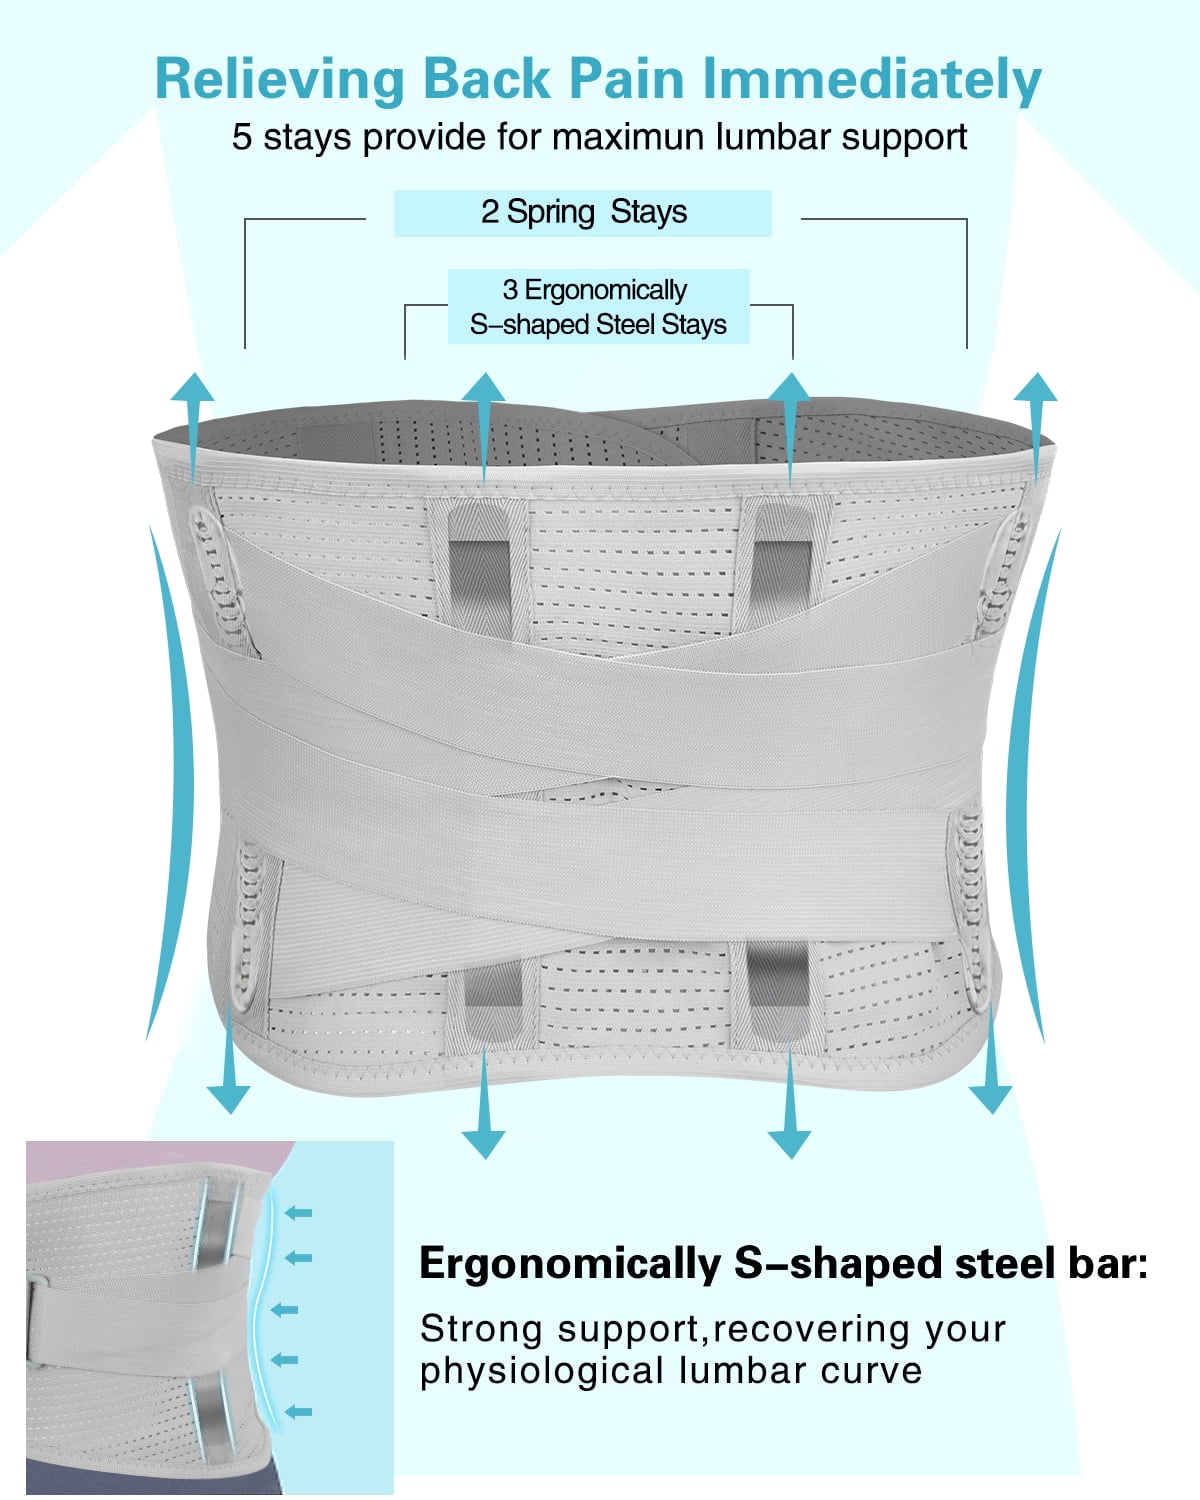 Wellco XL Breathable Back Support Belt for Men & Women Anti-Skid Lumbar Support for Heavy Lifting & Herniated Discs, Gray